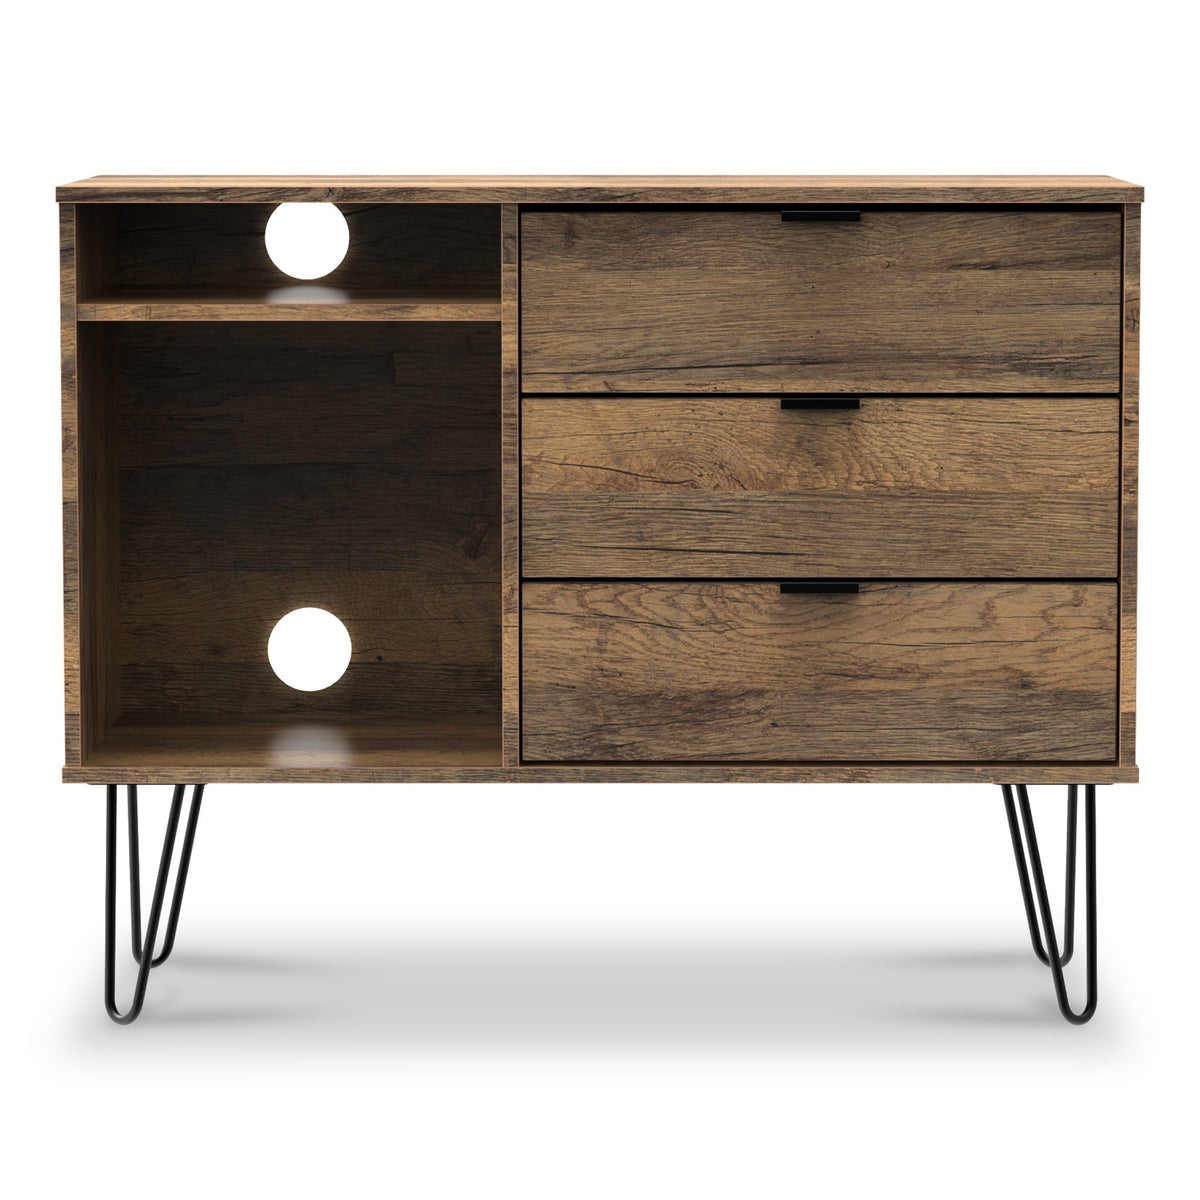 Moreno Rustic Oak 3 Drawer Tv Unit with Black Hairpin Legs from Roseland Furniture